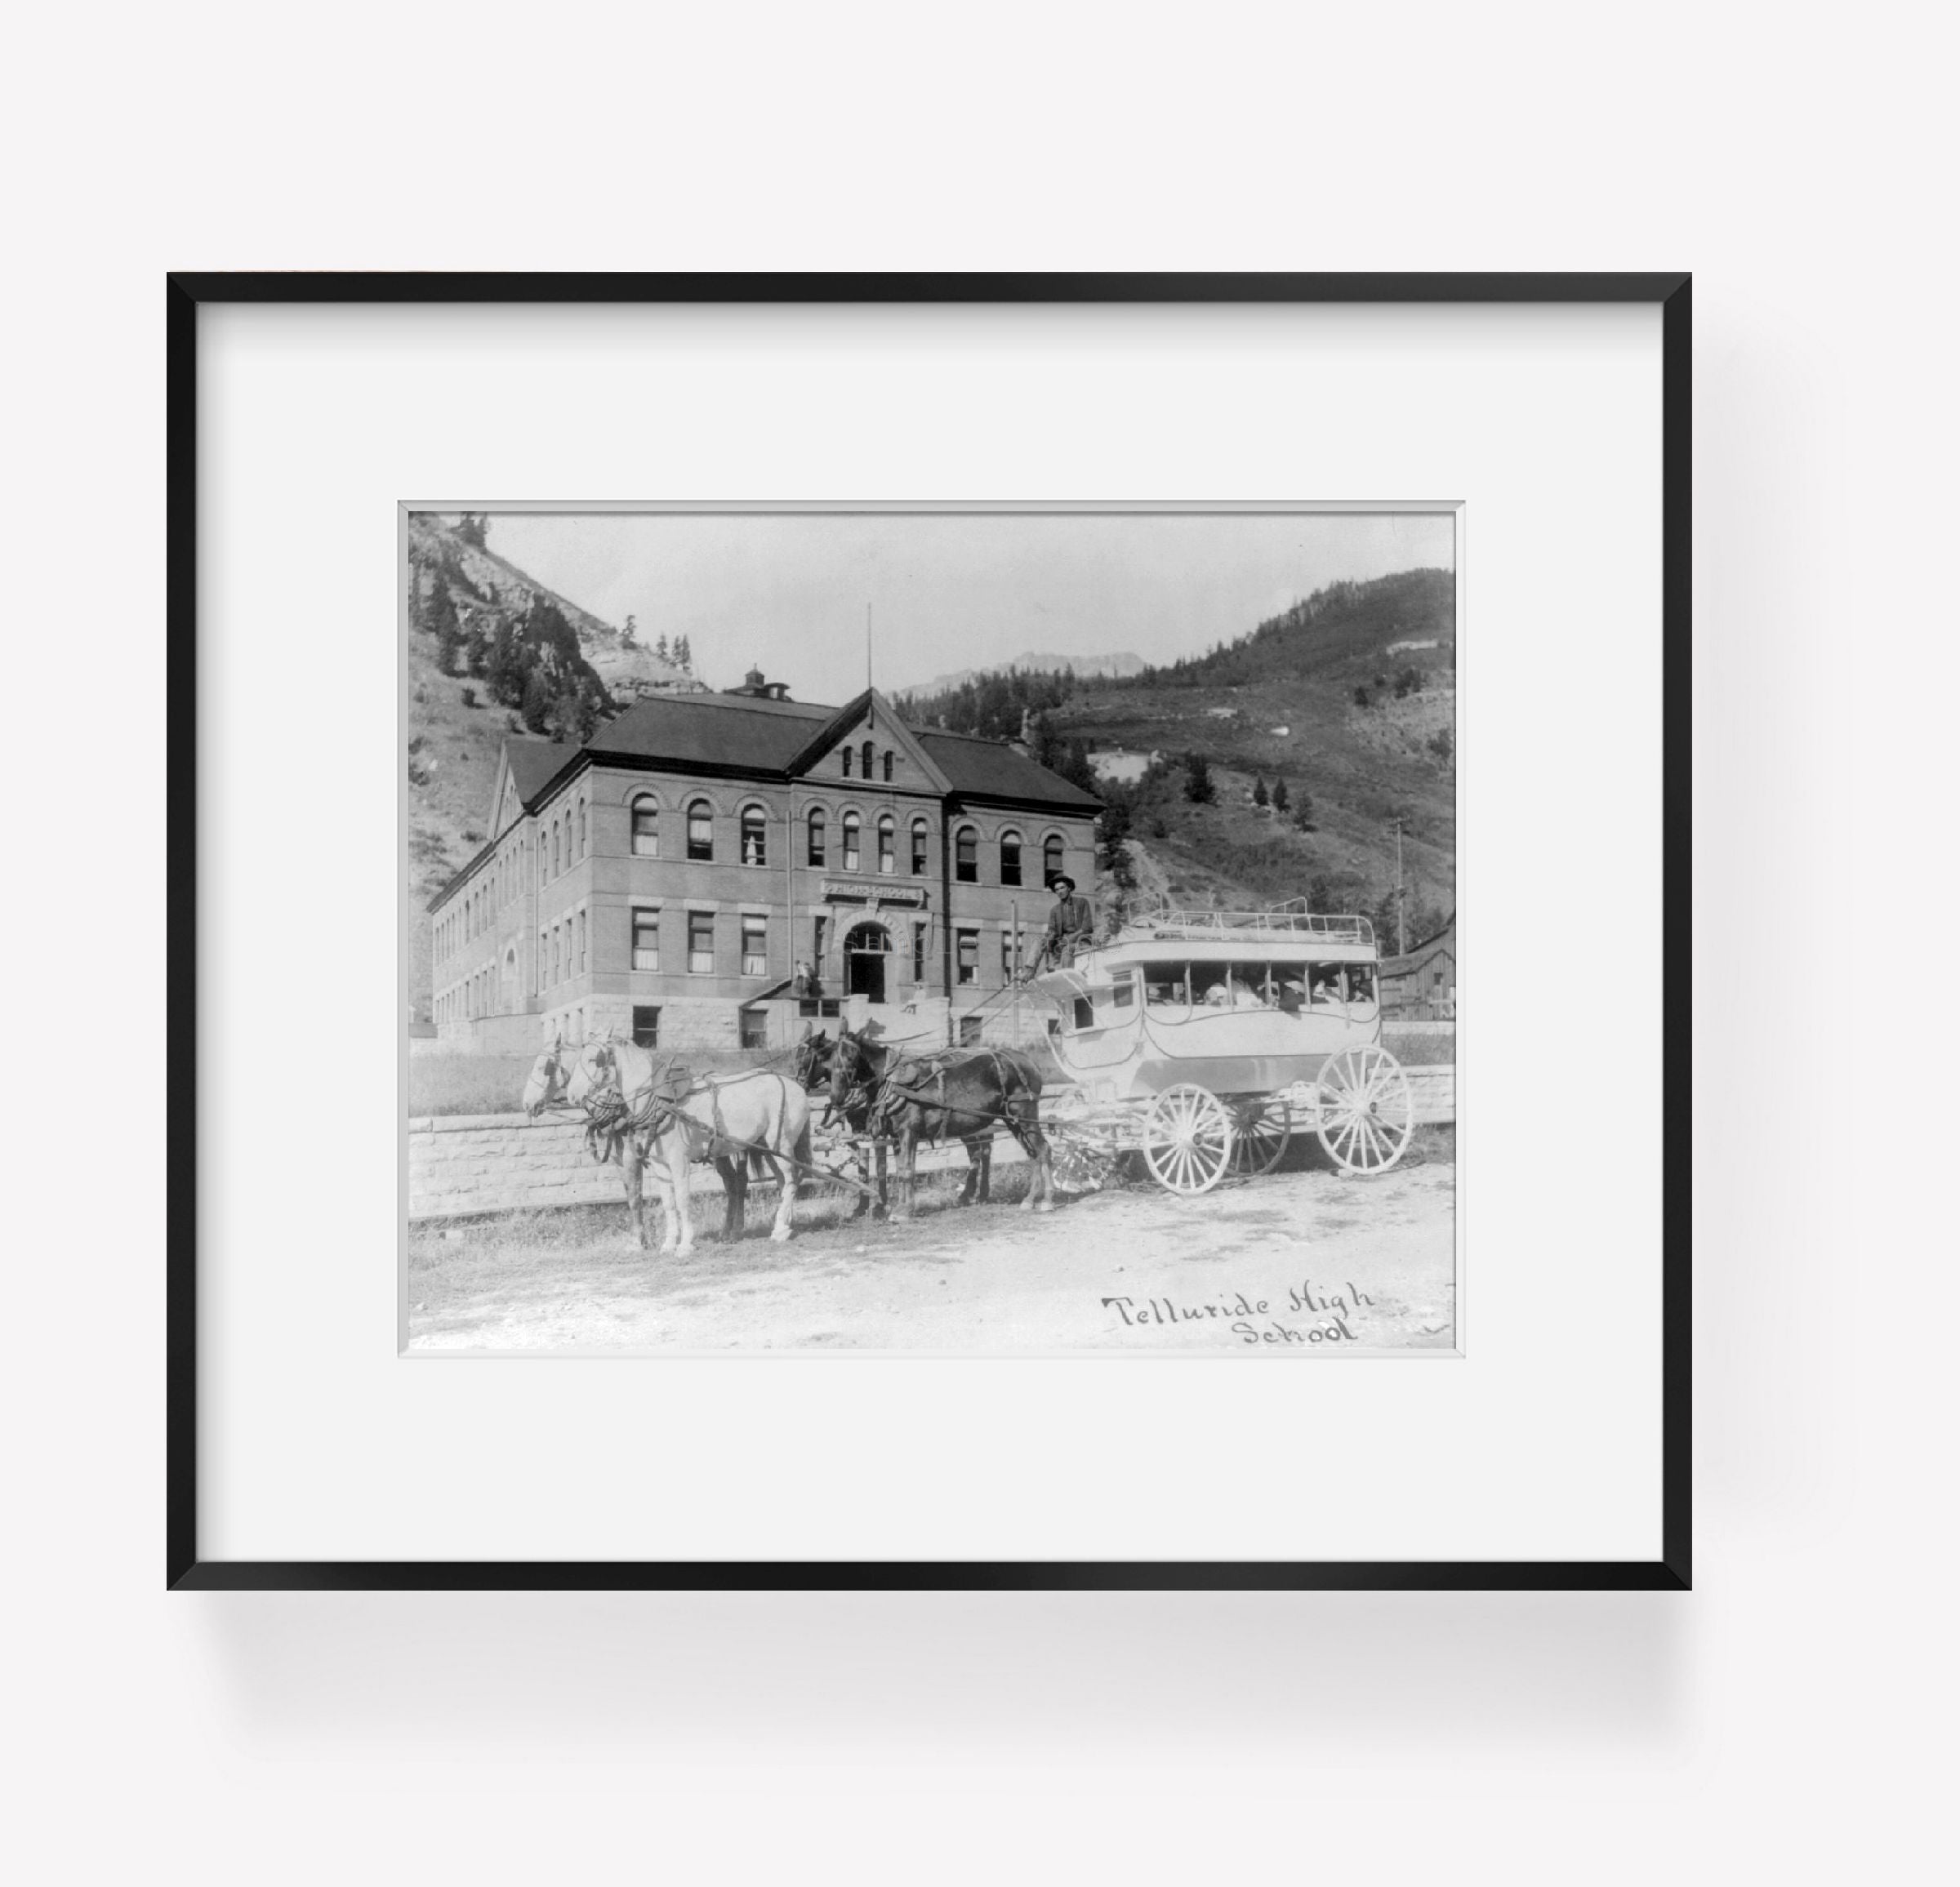 ca. 1910 photograph of Telluride high school Summary: Driver and bus drawn by fo